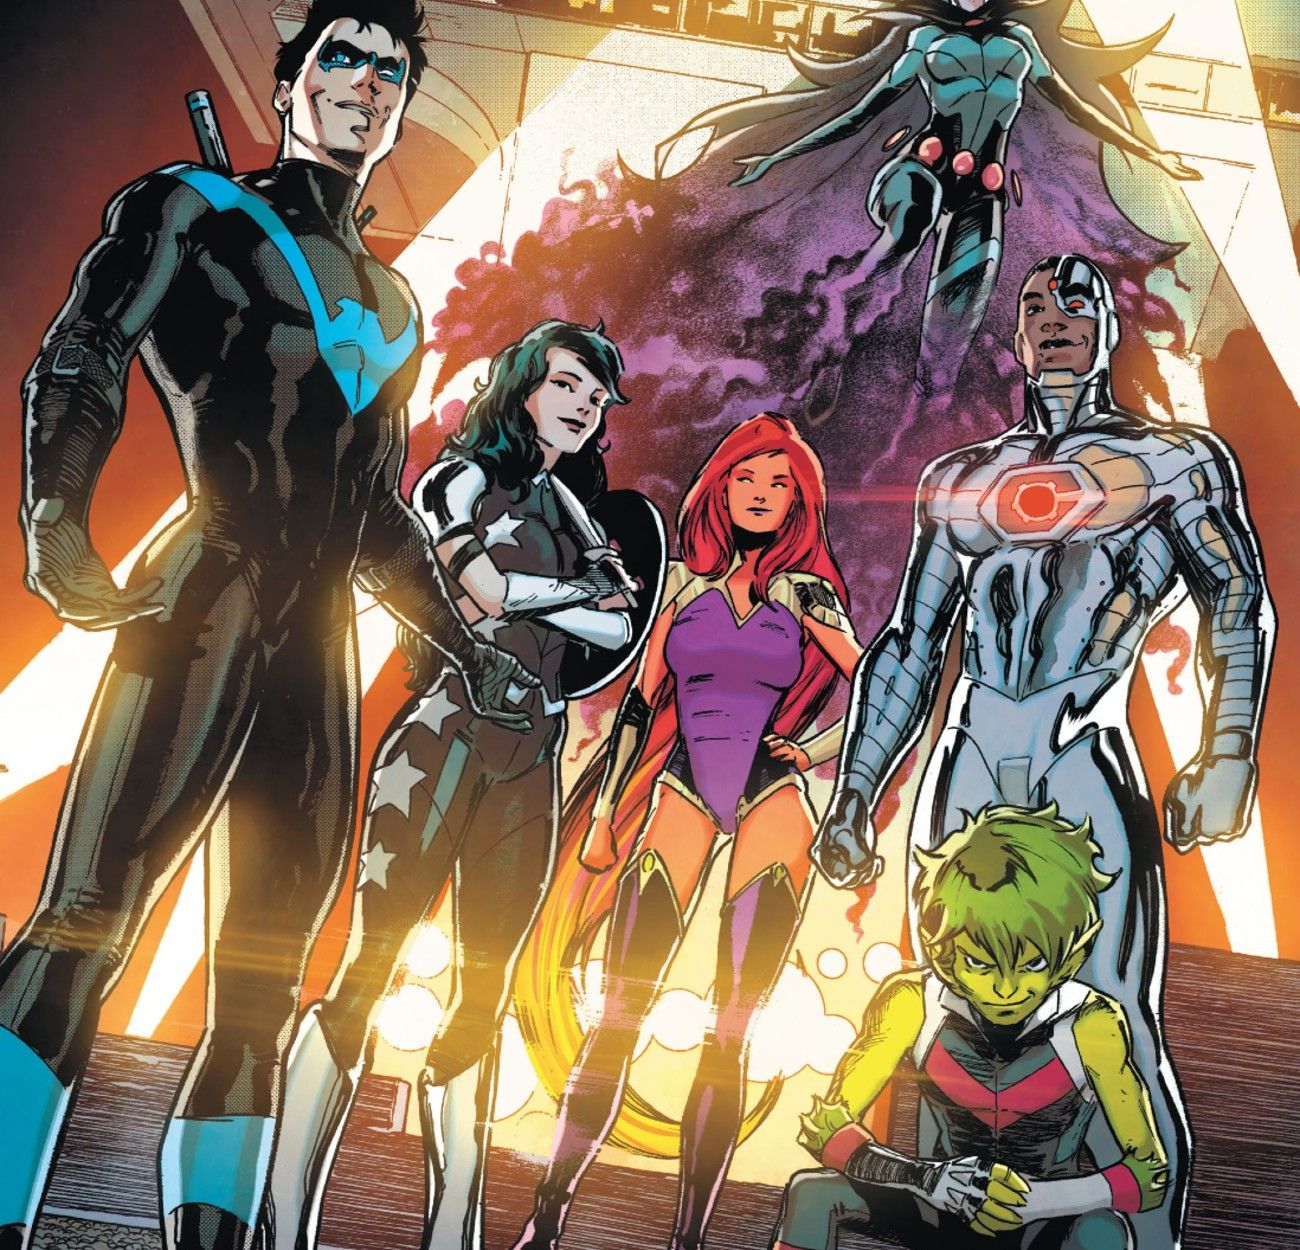 Panel featuring Nightwing, Donna Troy, Starfire, Cyborg, Raven, and Beast Boy from Teen Titans #47.